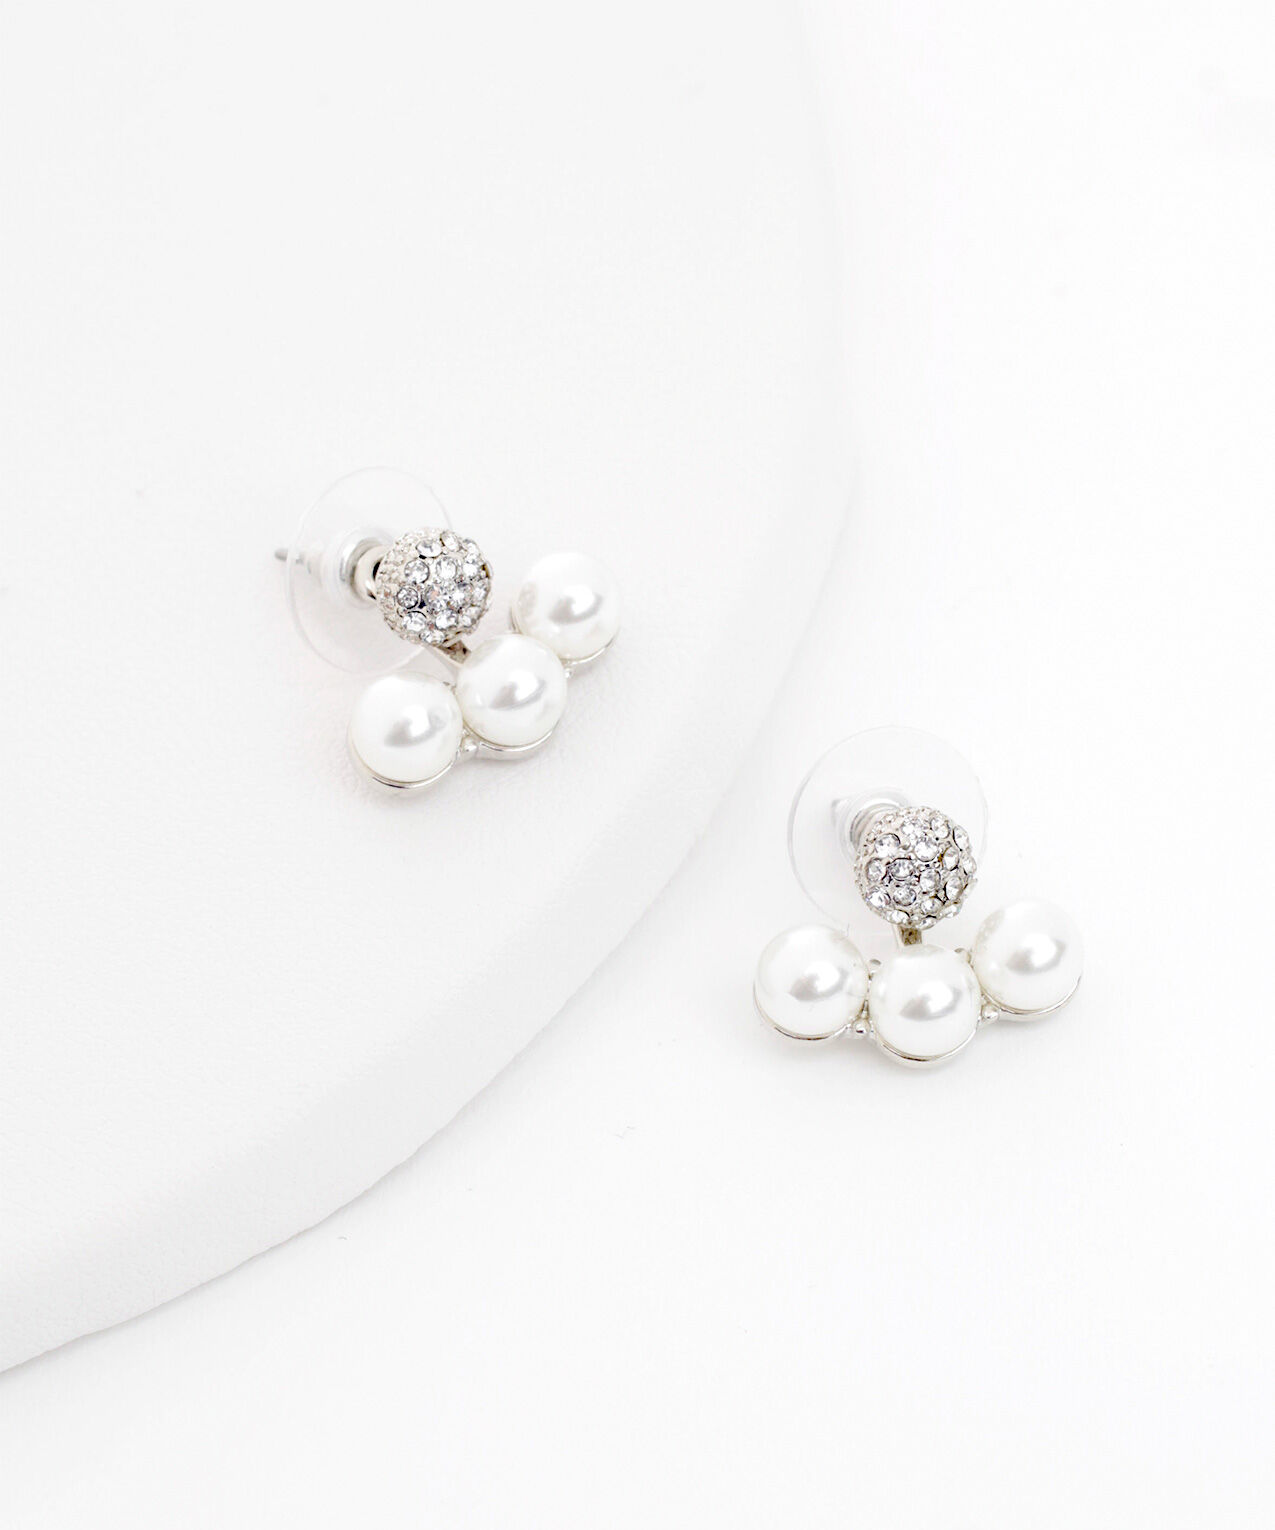 Small Silver Earrings with Pearls & Rhinestones